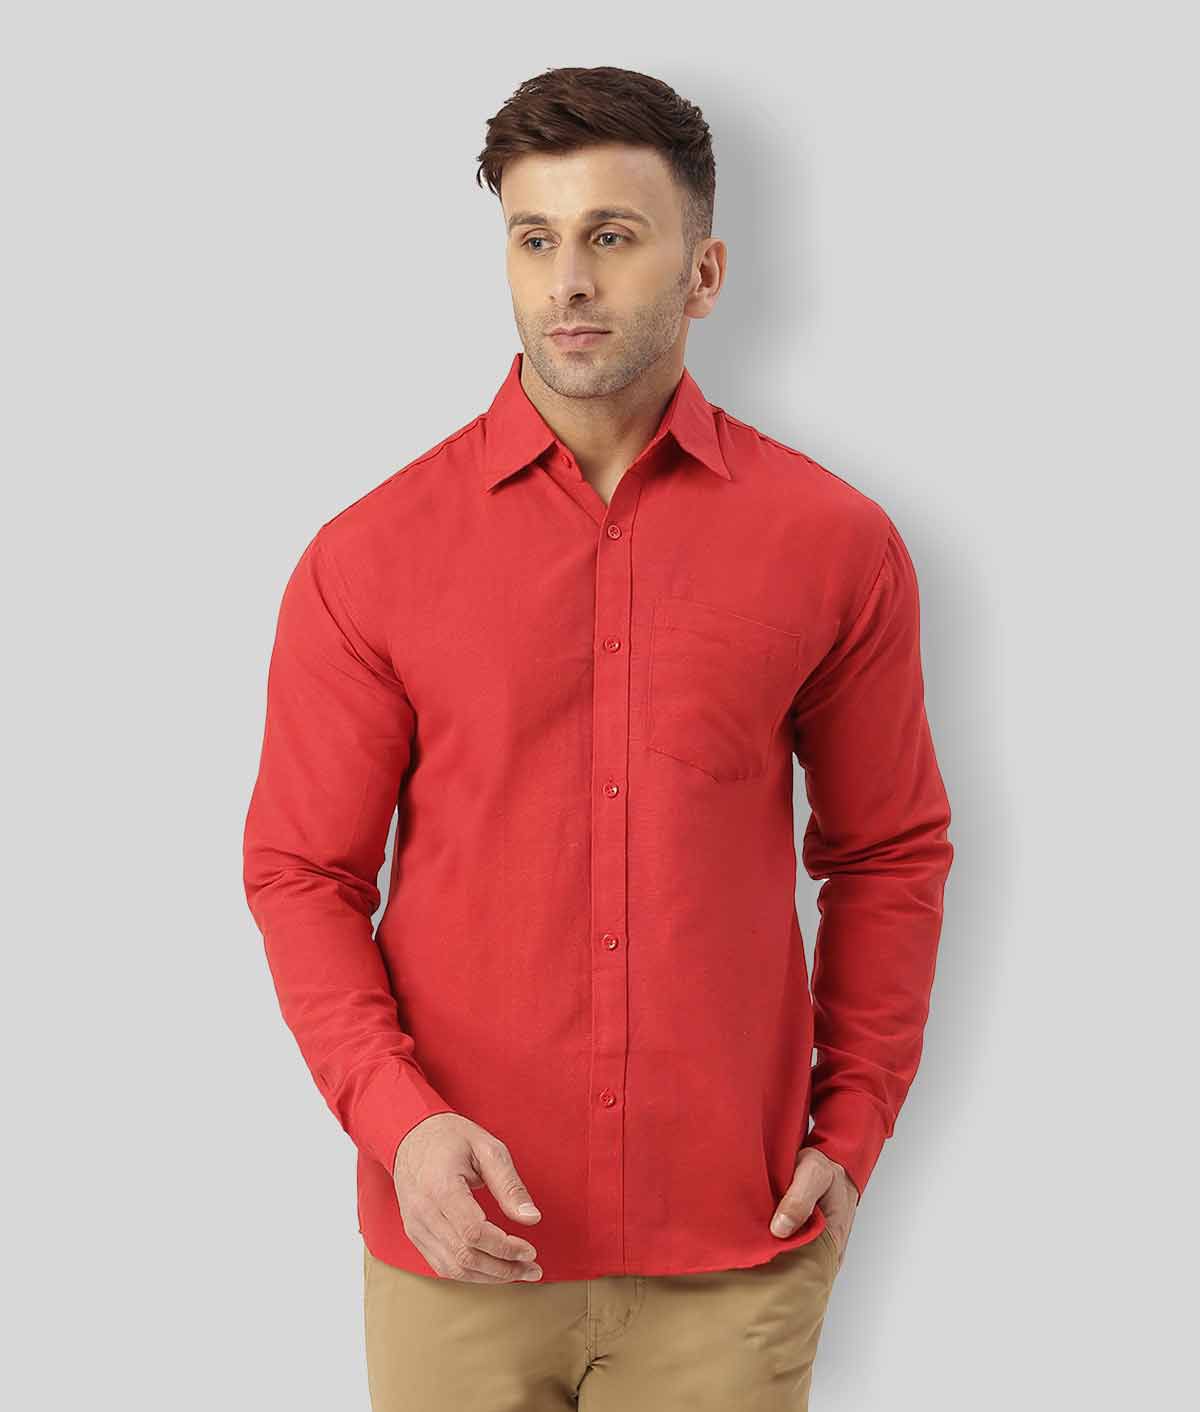     			RIAG - Red Cotton Regular Fit Men's Casual Shirt (Pack of 1 )